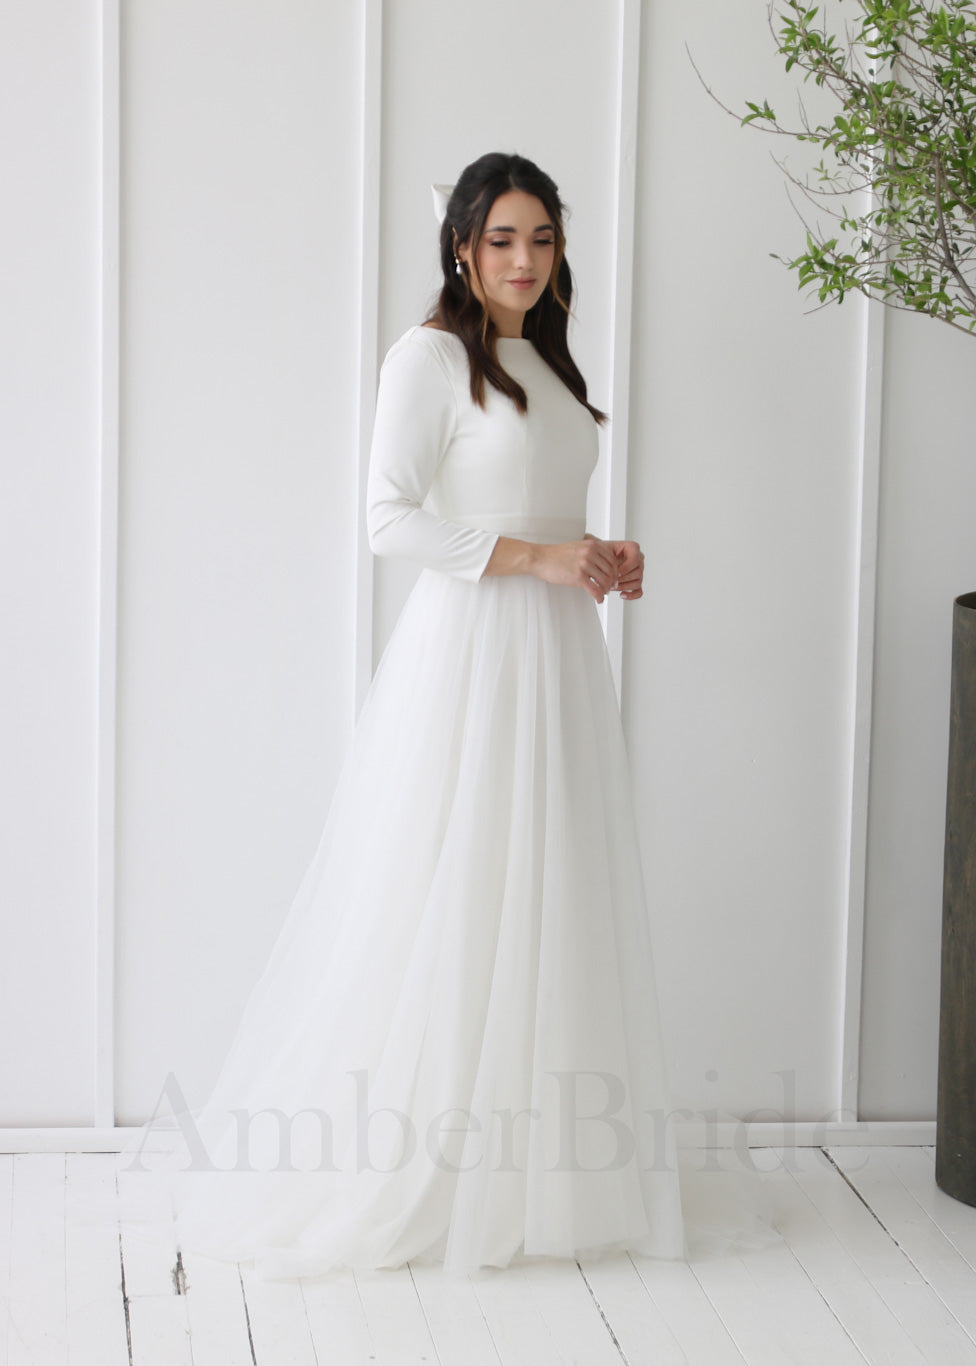 Minimalist Satin and Tulle Wedding Dress with Long Sleeves and Backless Design